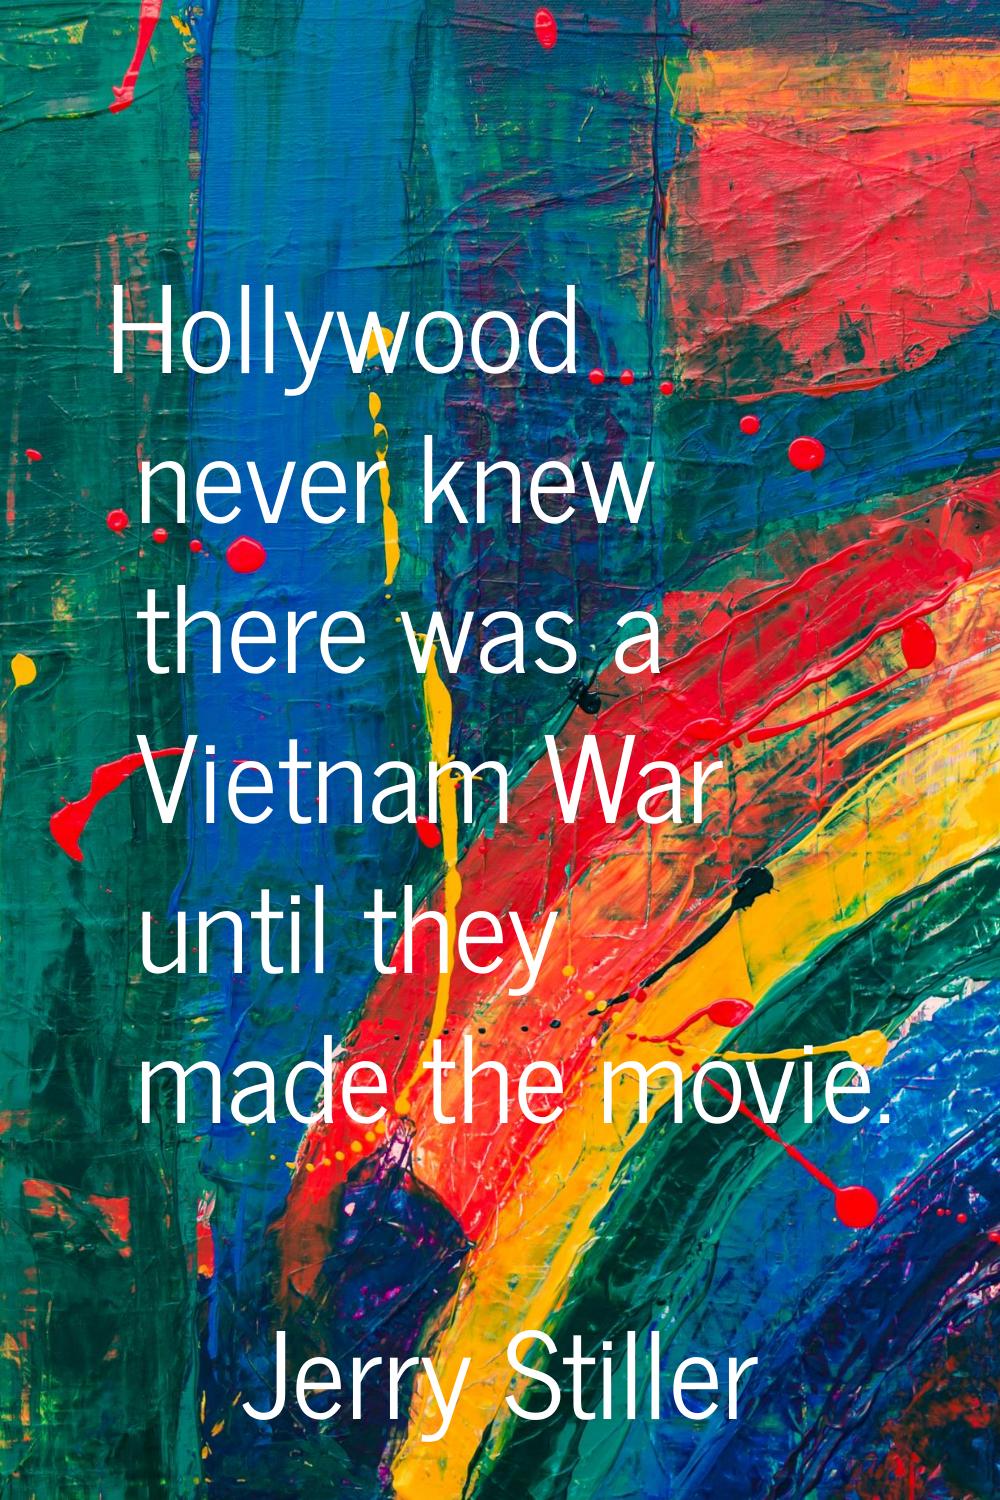 Hollywood never knew there was a Vietnam War until they made the movie.